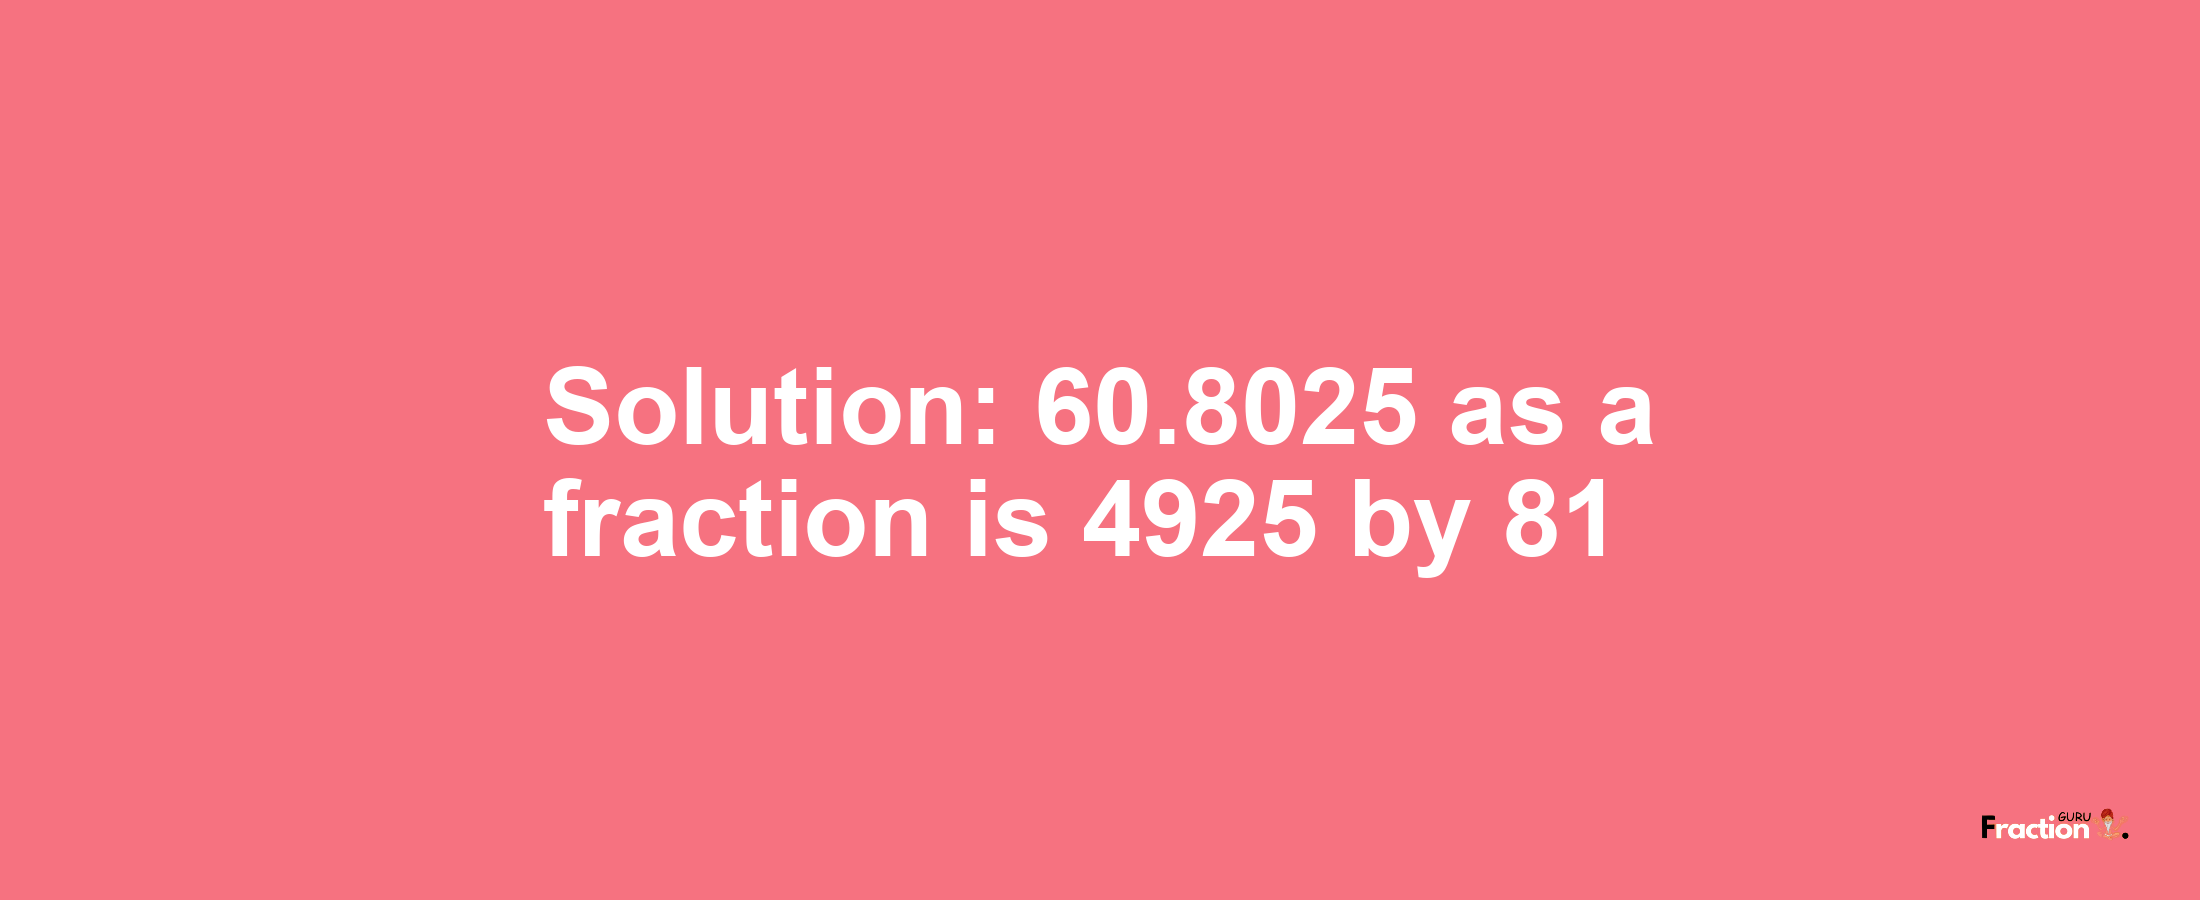 Solution:60.8025 as a fraction is 4925/81